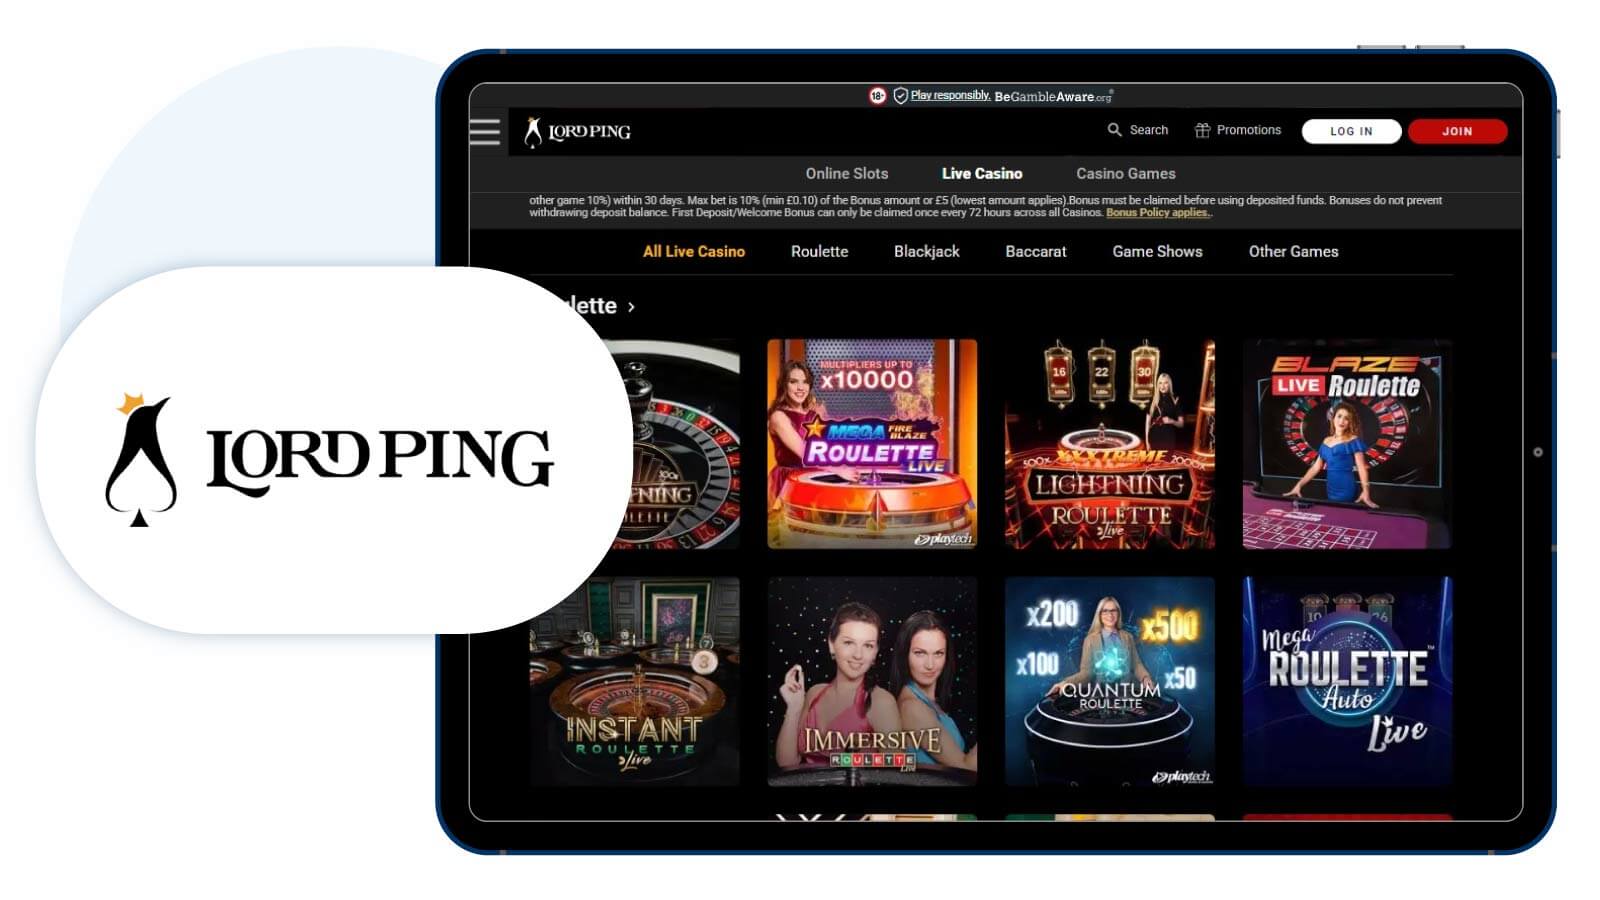 Lord-Ping-Best-live-baccarat-casino-in-the-UK